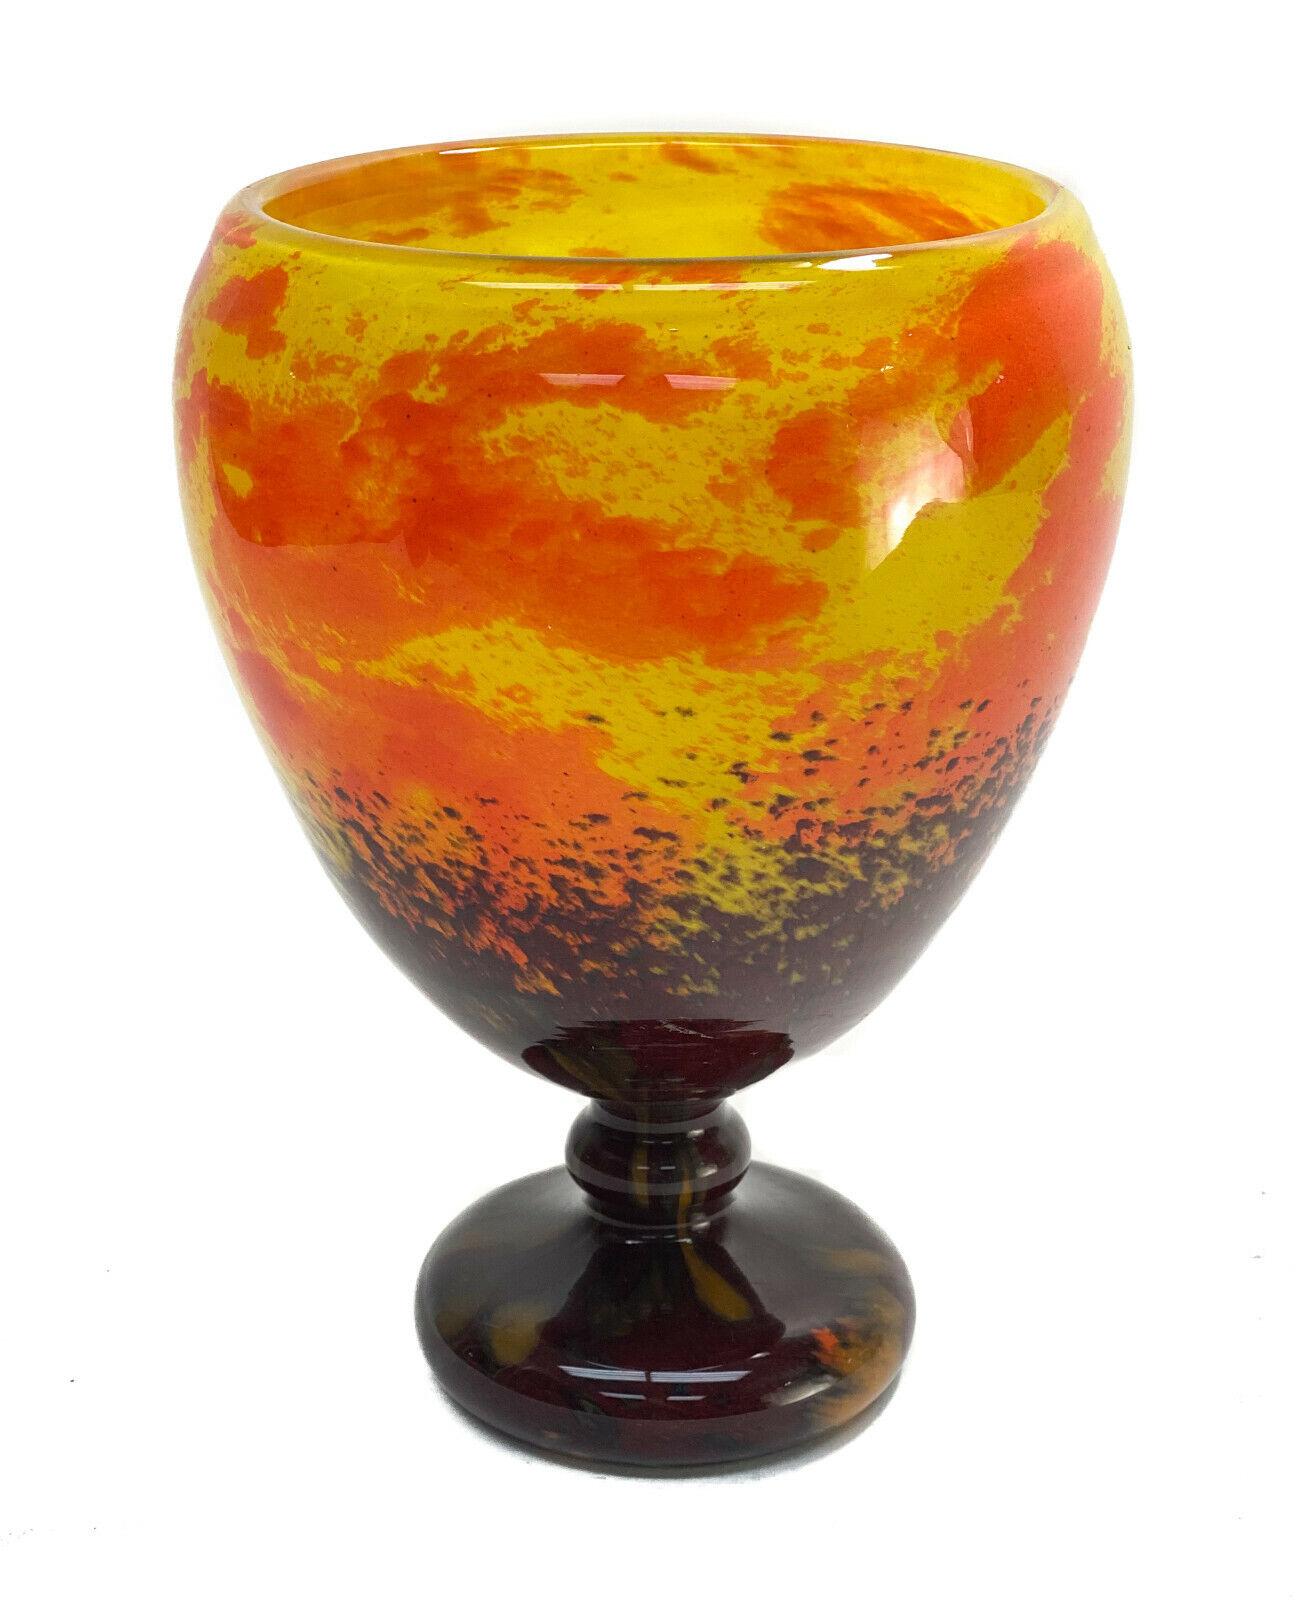 Charles Schneider French Art Glass Orange & Yellow Mottled Footed Vase

Mottled yellow and orange hues with a maroon red huge to the stem and base. Signed 